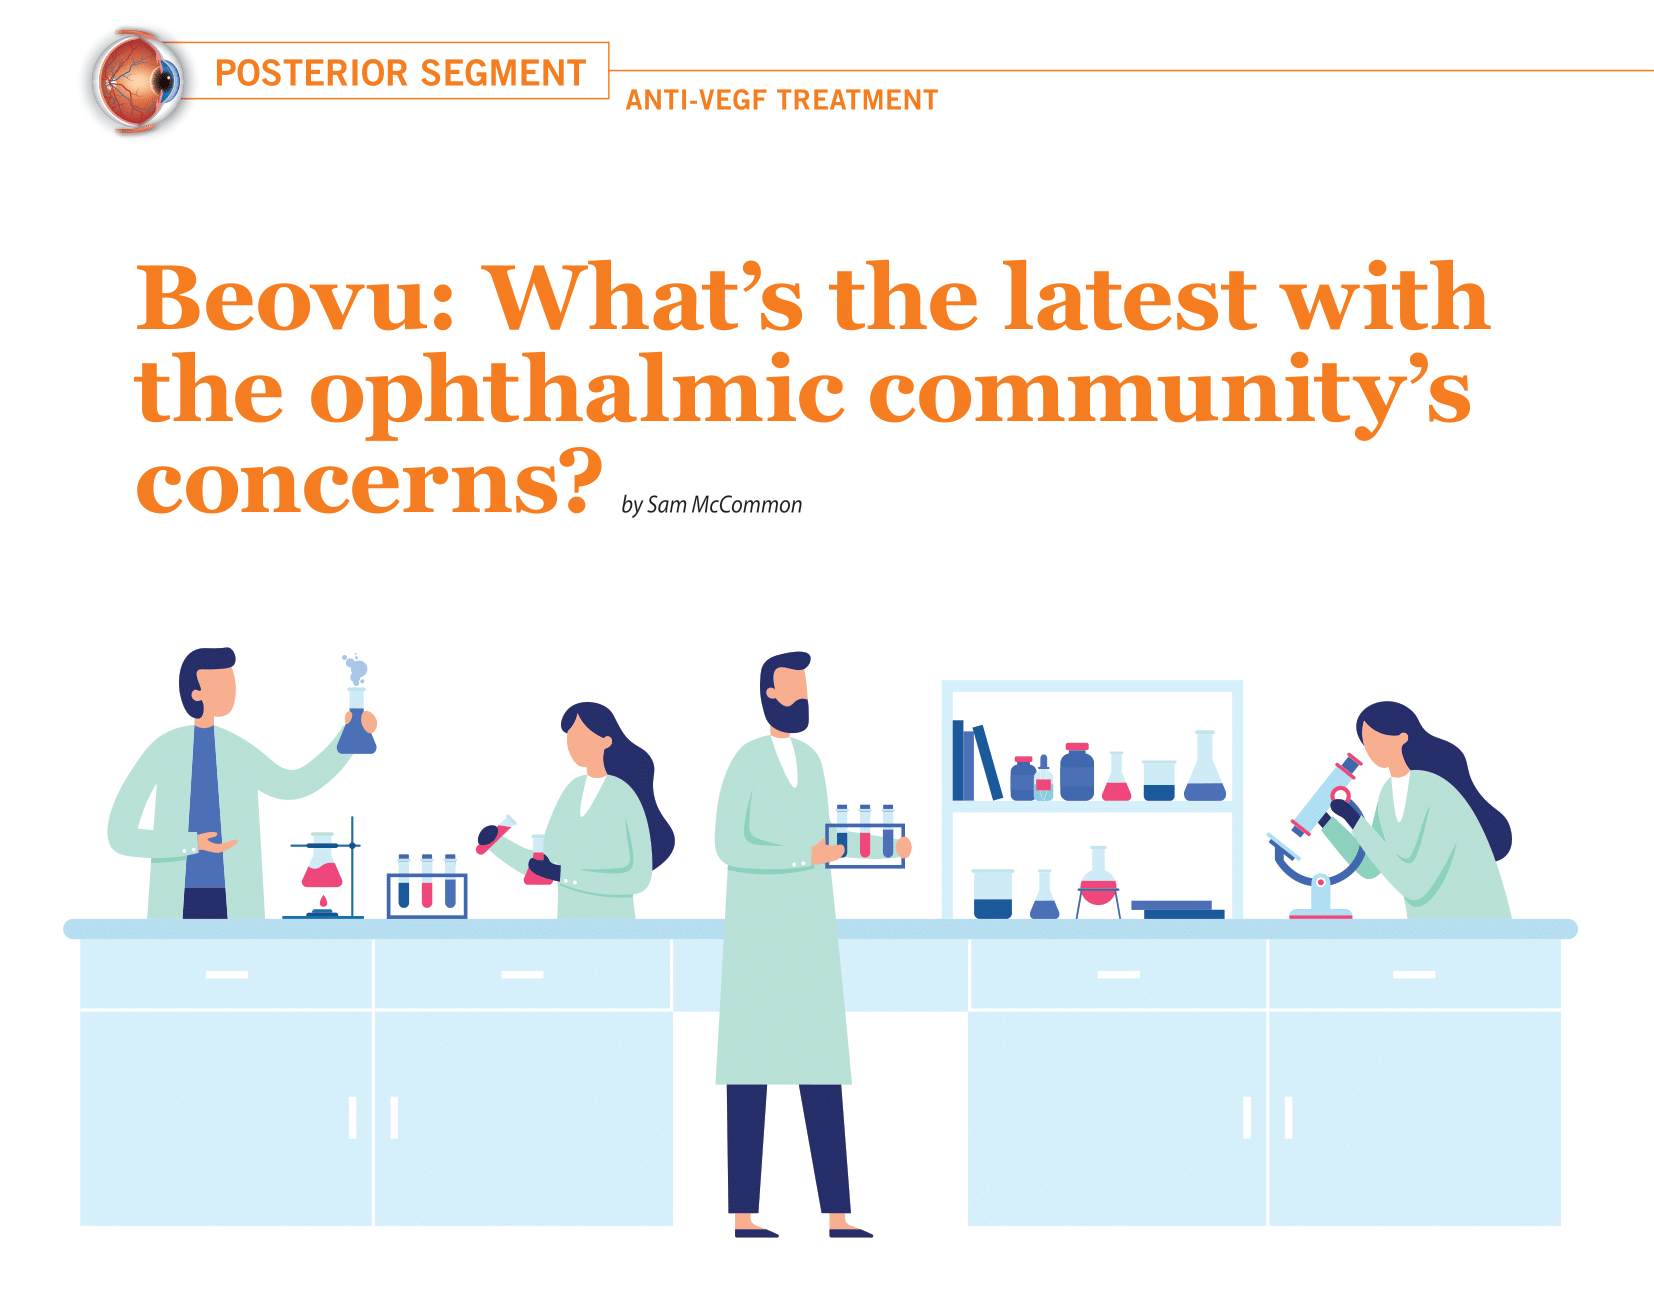 Beovu: What’s the latest with the ophthalmic community’s concerns?